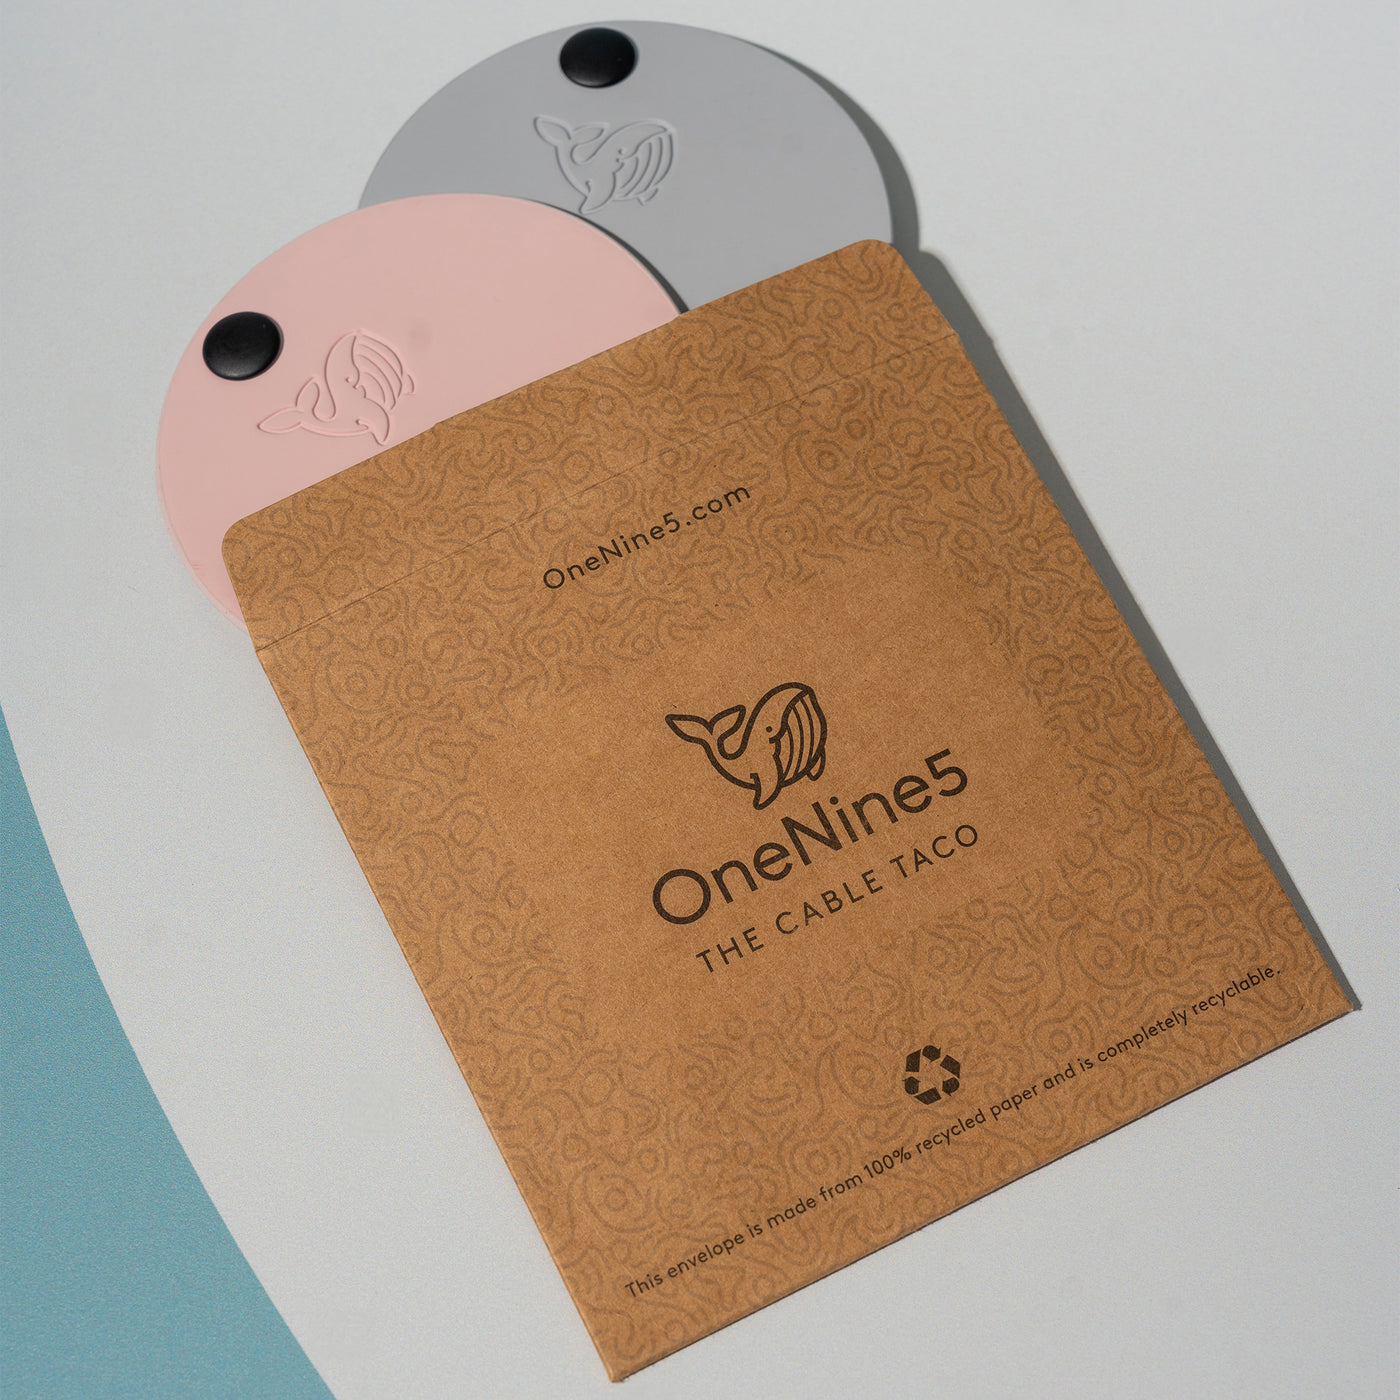 A grey and pink OneNine5 cable tidy, poking out of the unbleached and plastic-free kraft paper packaging.